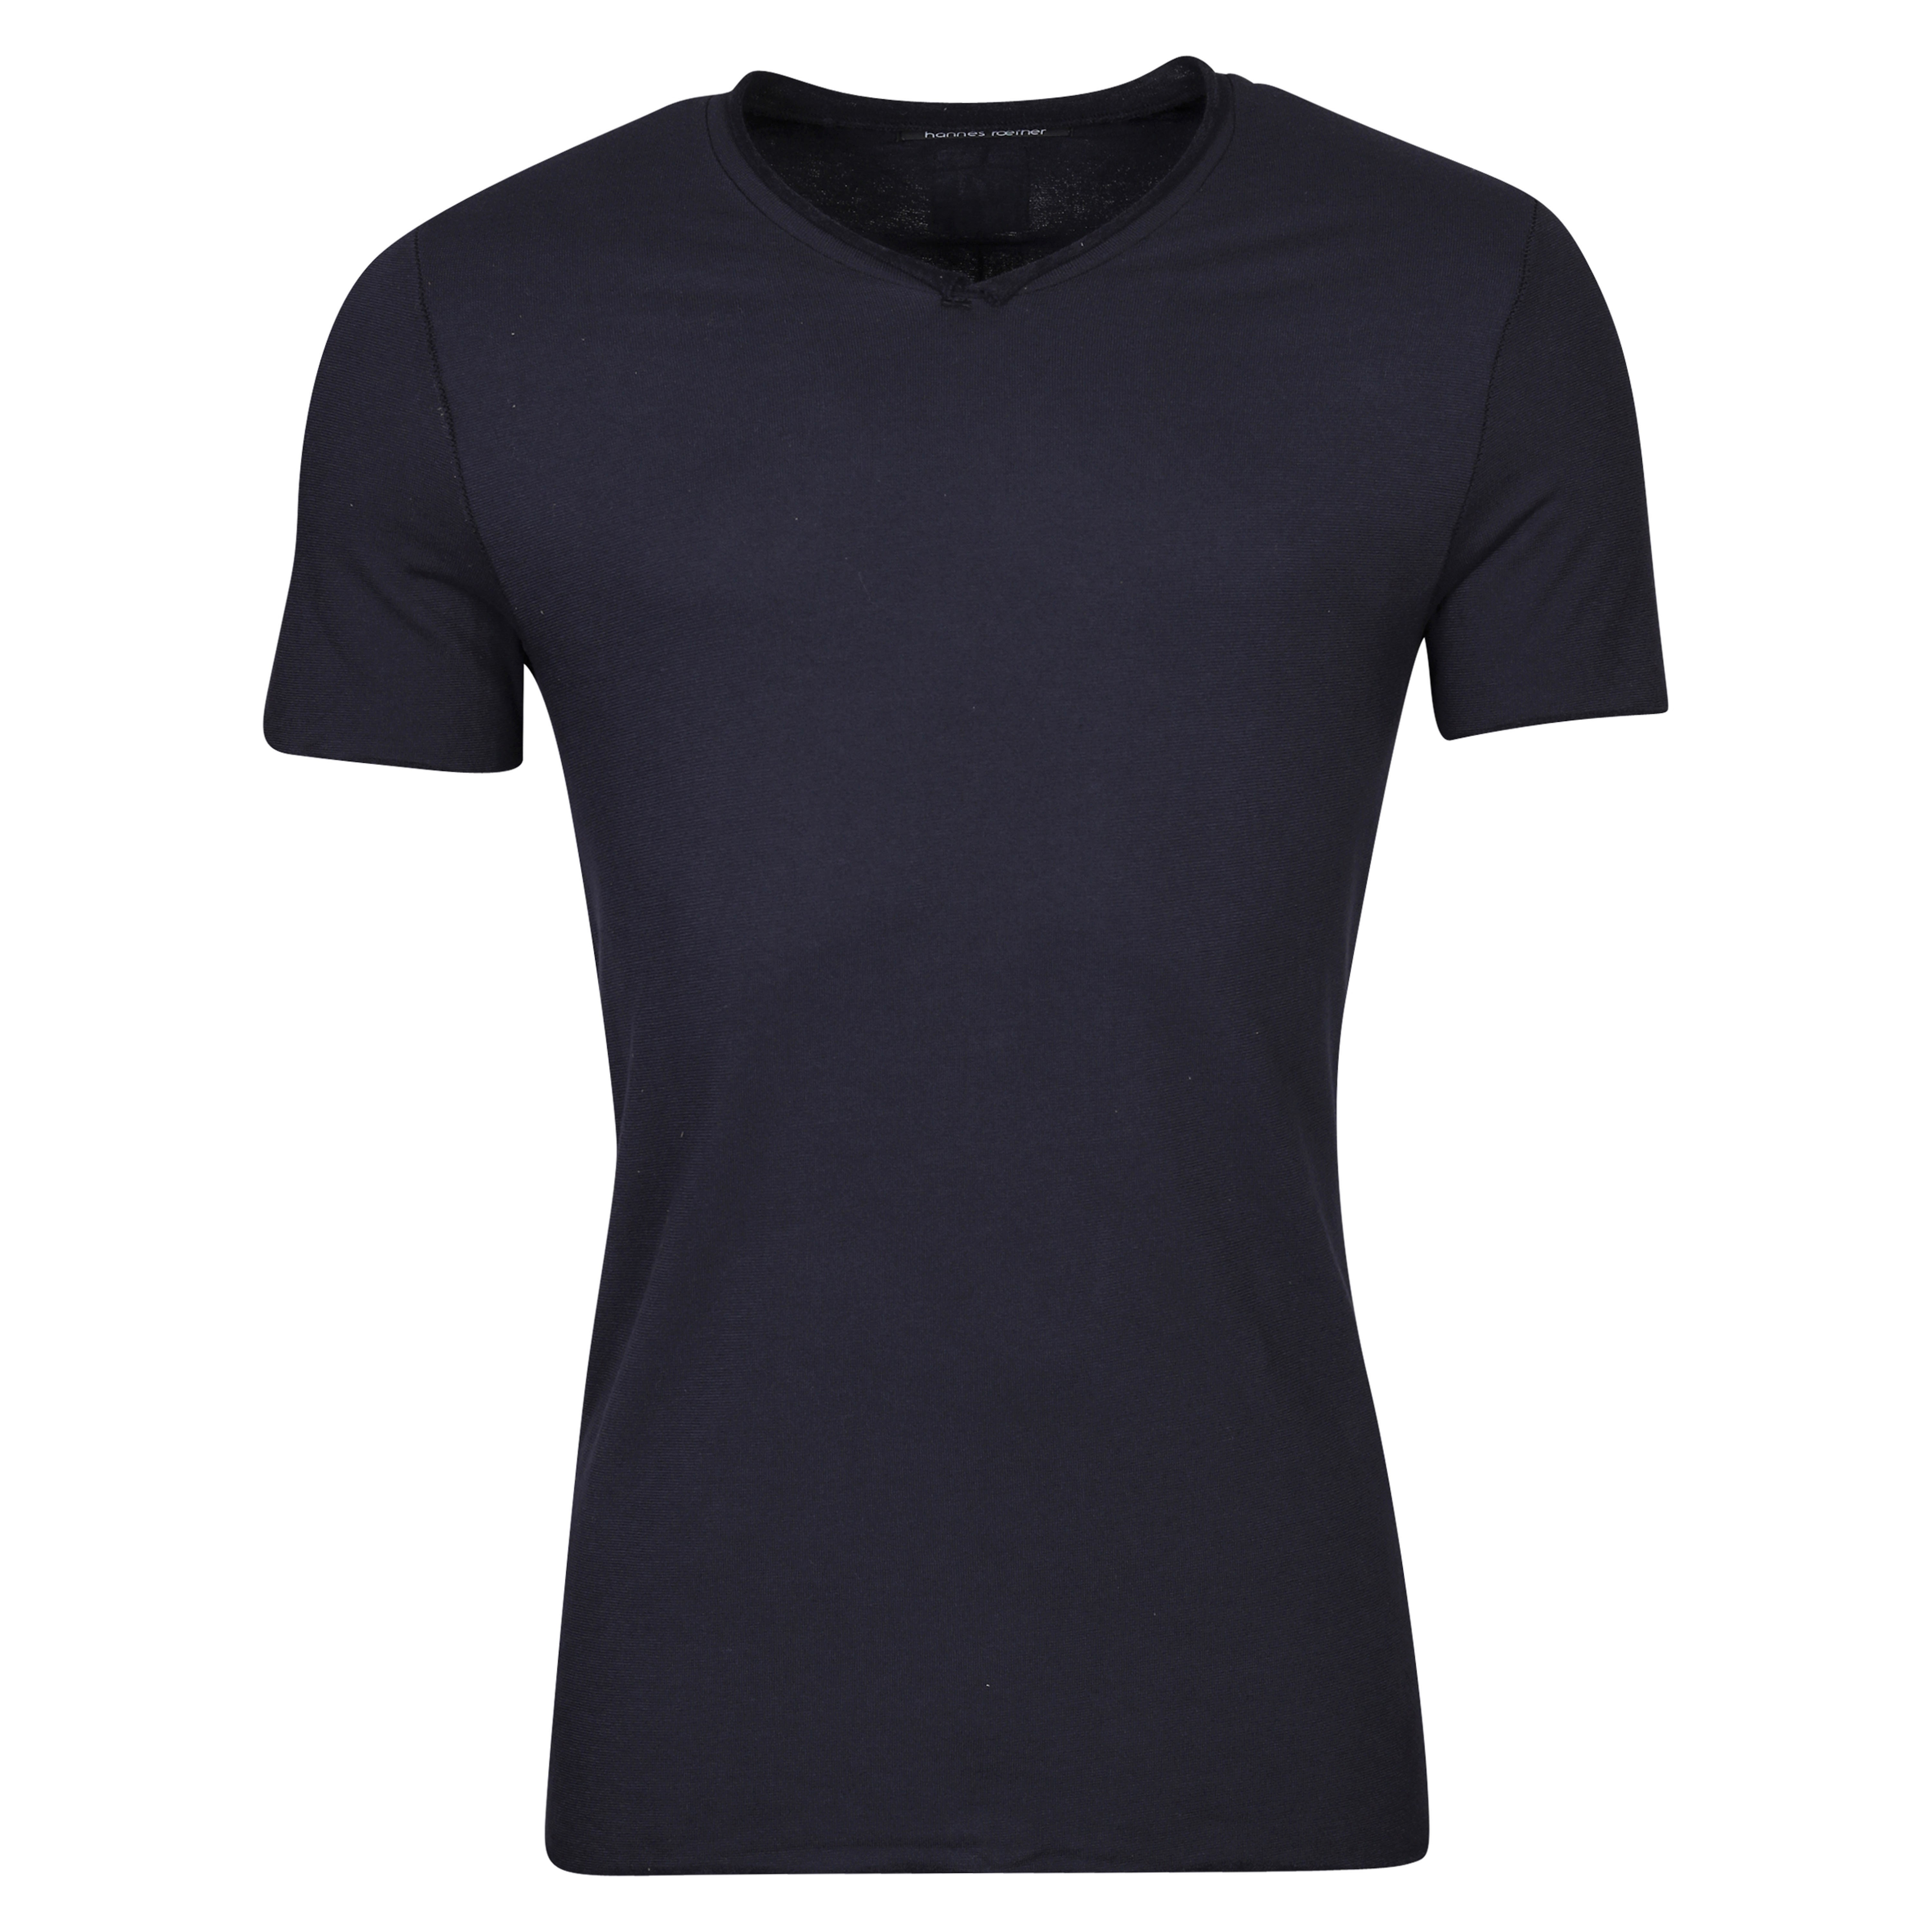 Hannes Roether Frottee V-Neck T-Shirt in Dark Navy